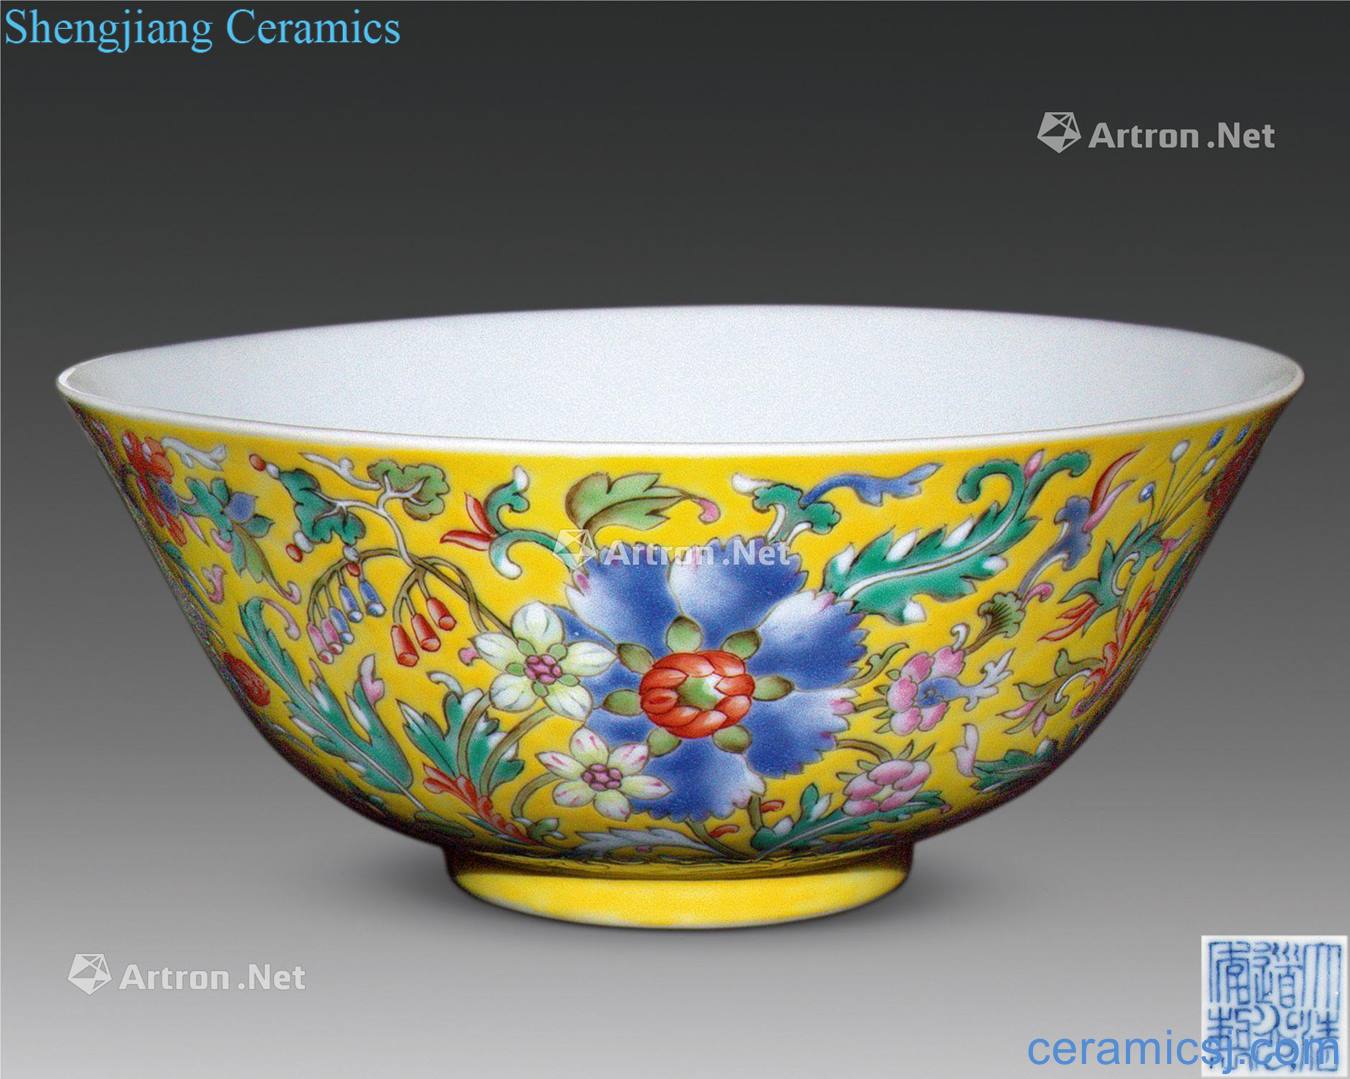 Qing daoguang To color the flowers yellow bowls